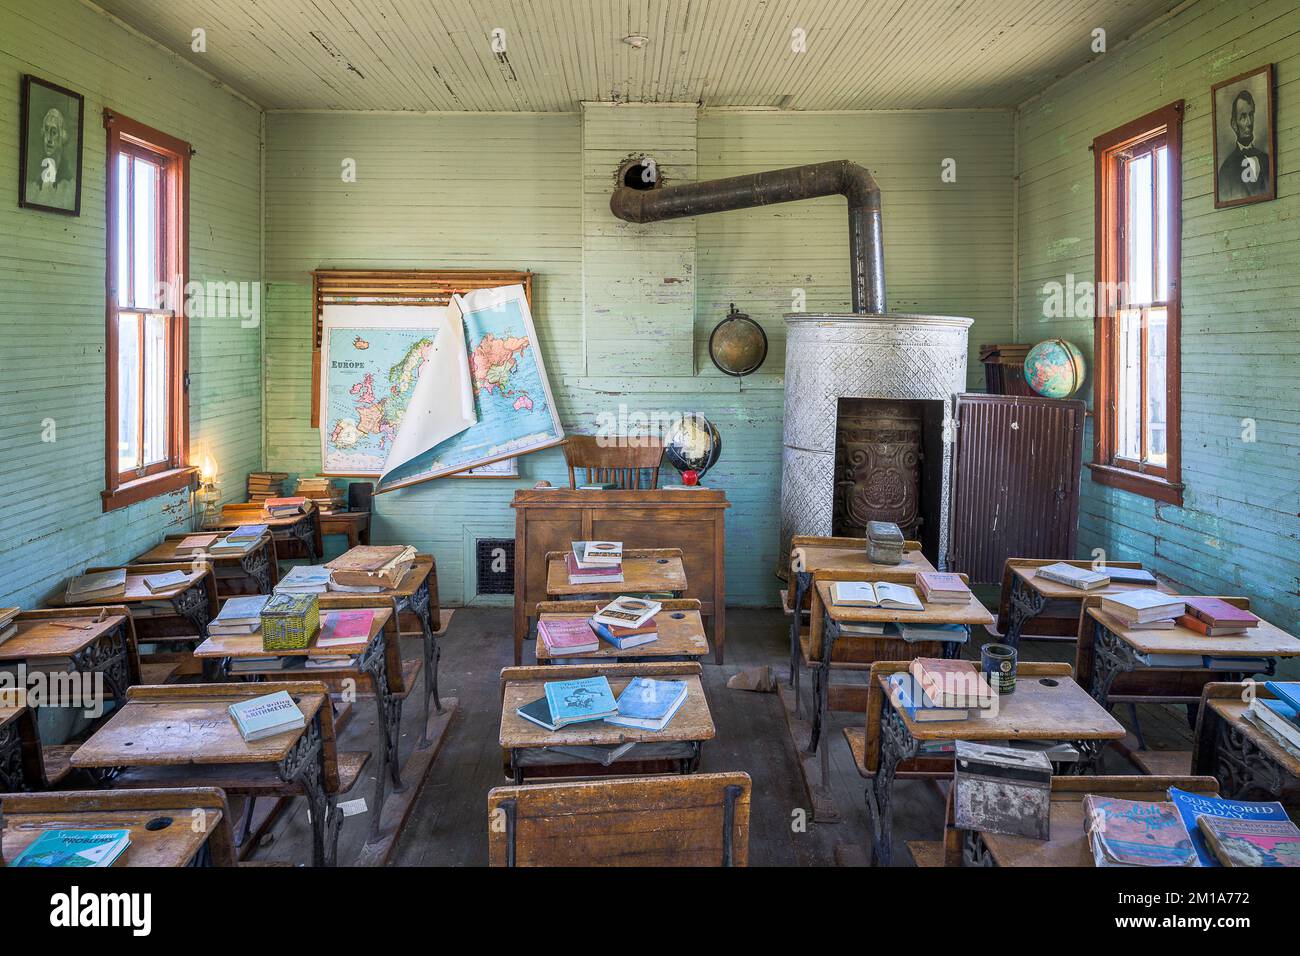 Interior of the one-room schoolhouse at the 1880 Town in Midland, South Dakota Stock Photo